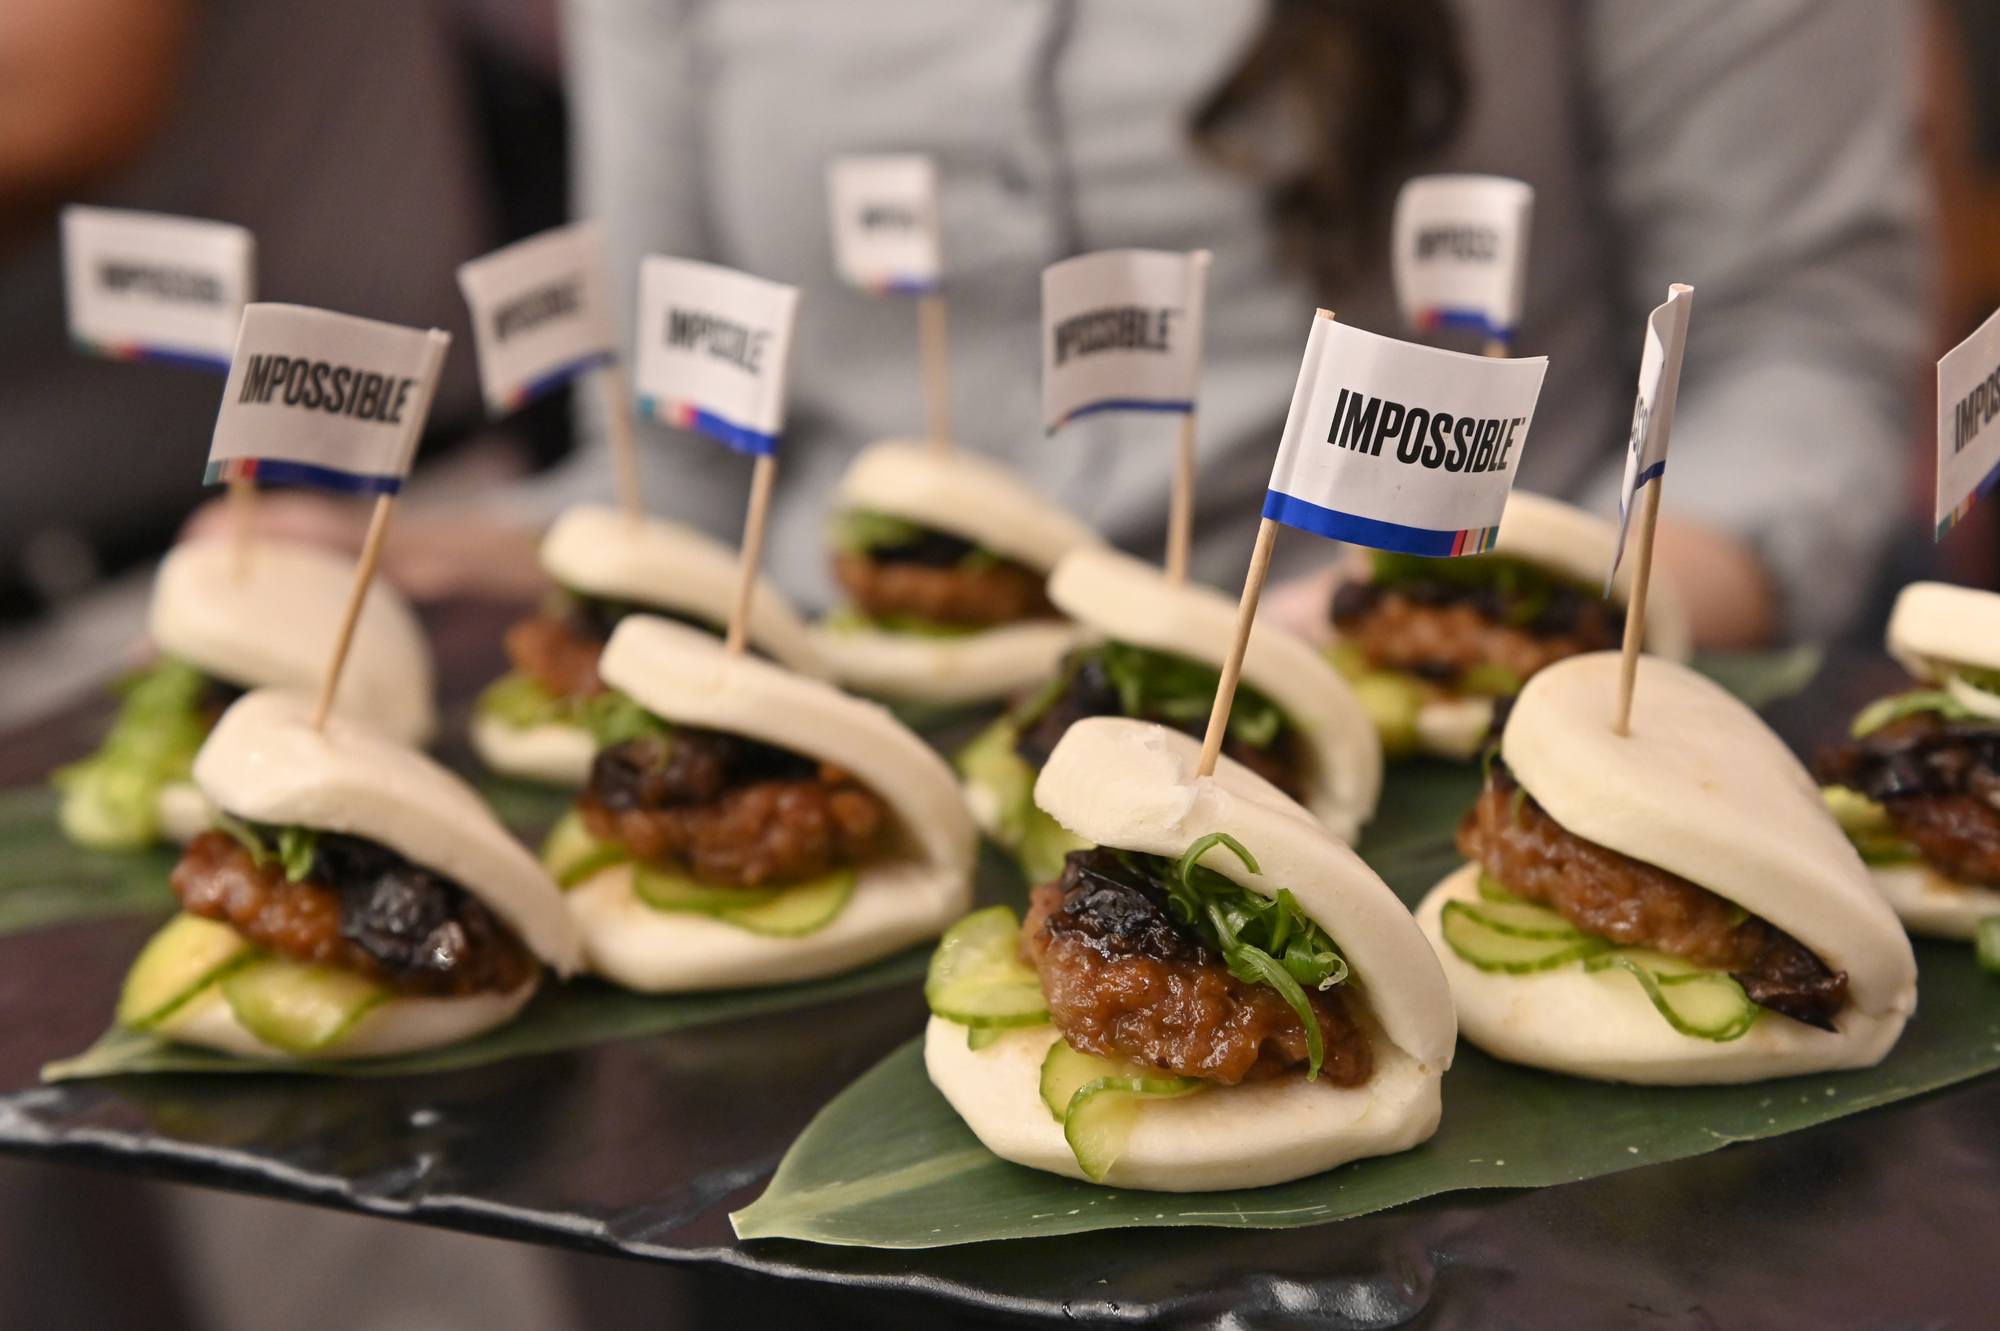 A tray of impossible burgers with pickles, buns, and white impossible flags in them with person in background February 2022.